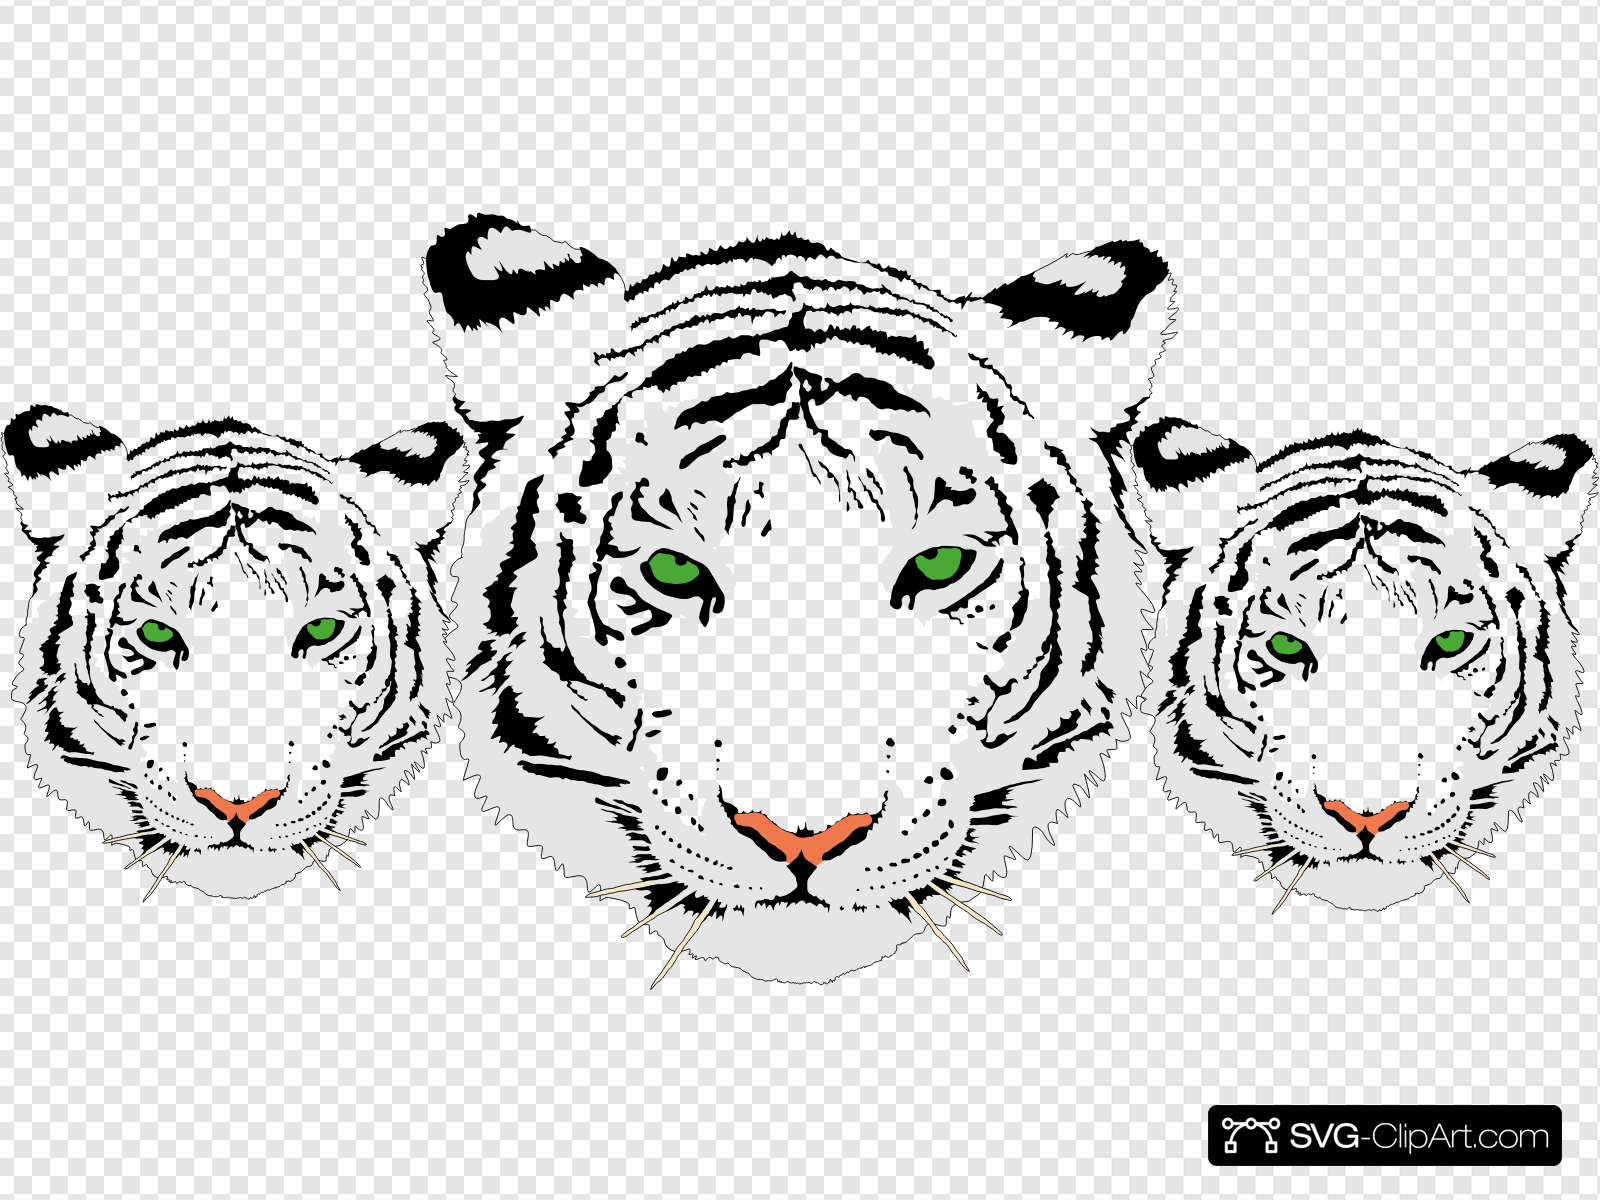 3 White Tiger Heads Clip art, Icon and SVG.